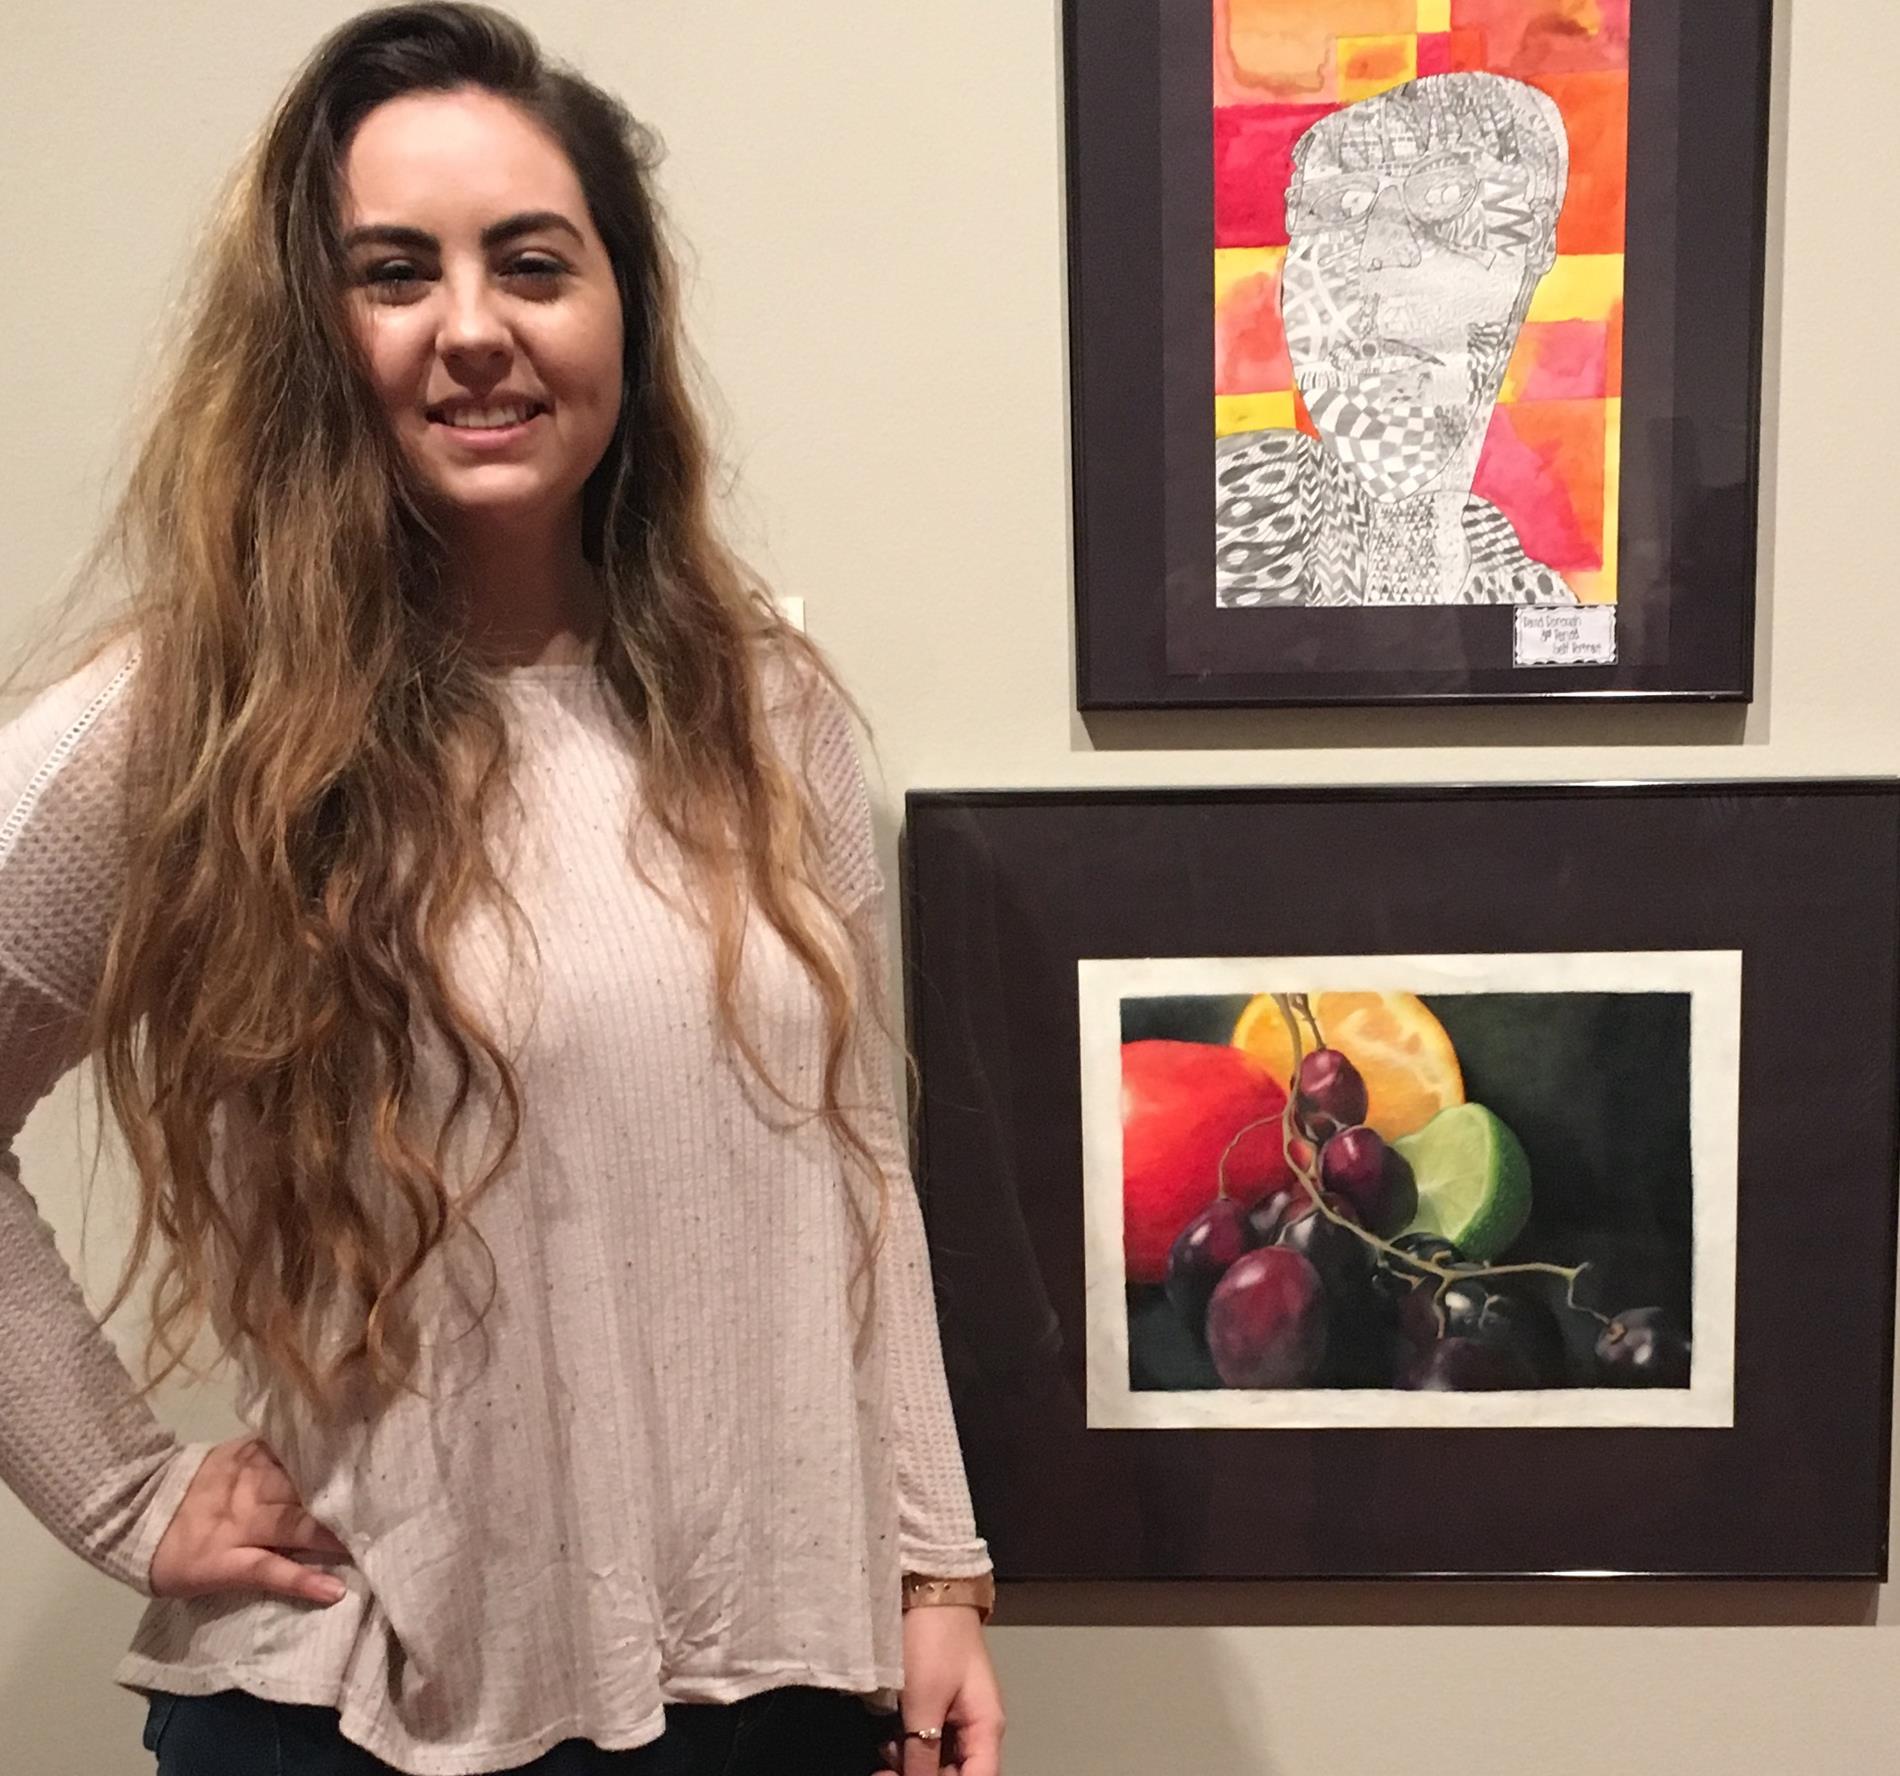 Student posing with her artwork